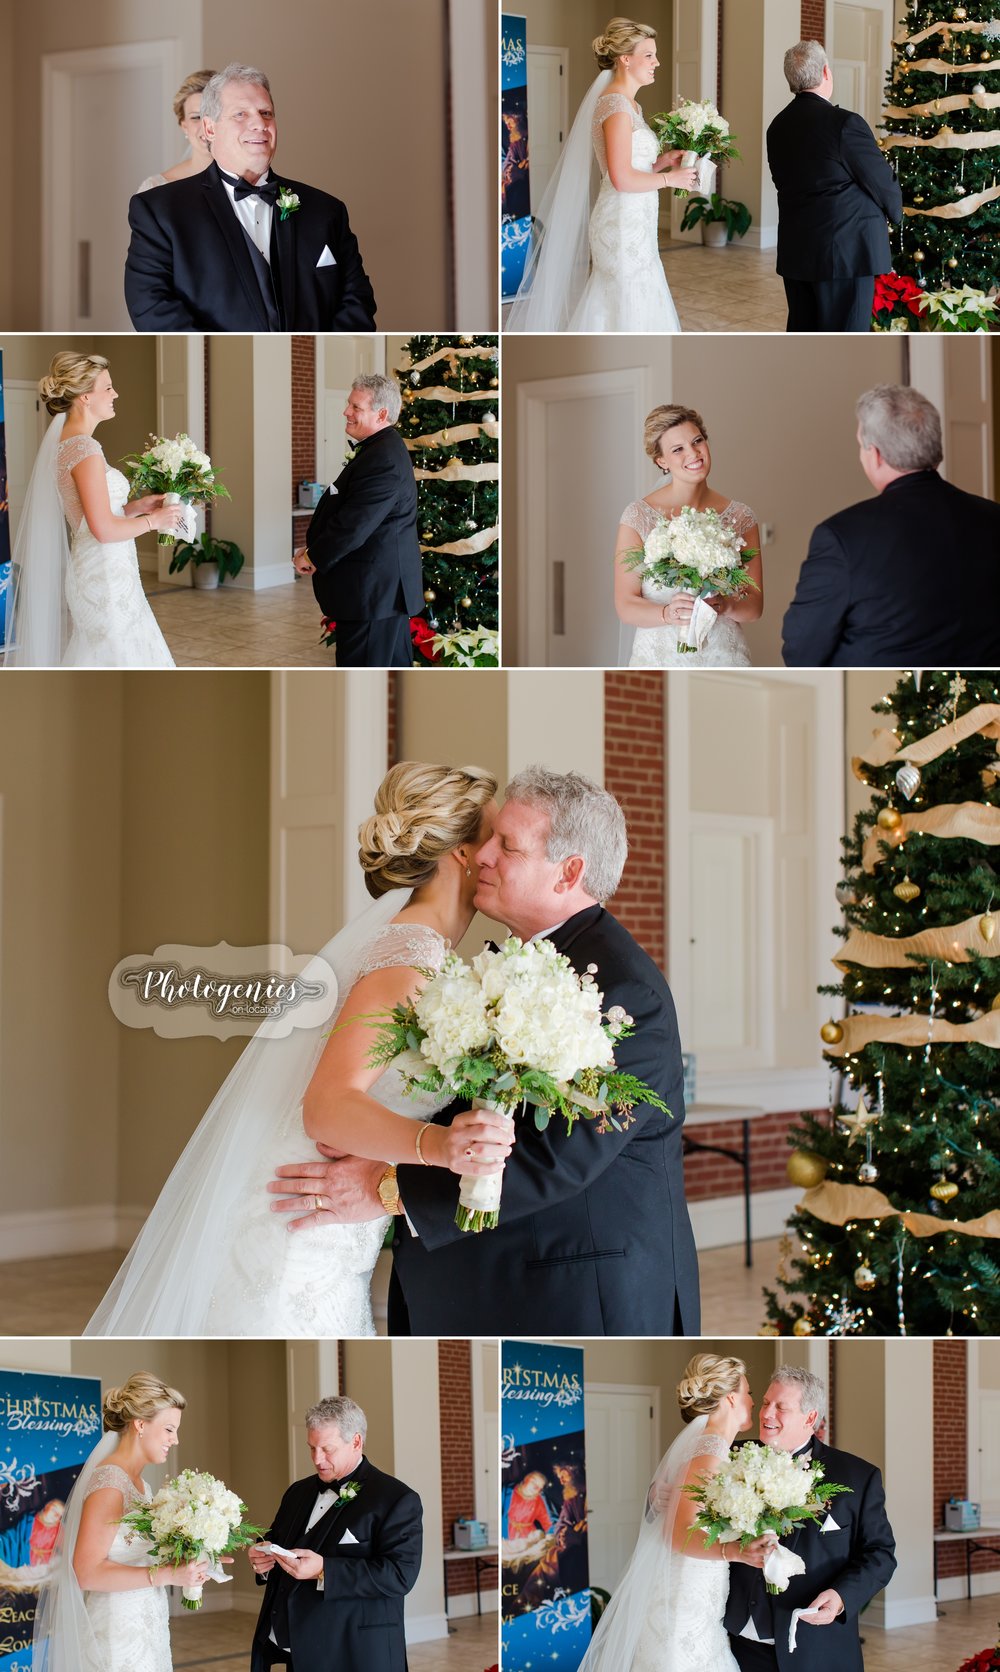  nye_wedding_new_years_eve_night_photography_bridal_details_ideas_planning_getting_ready_first_look_dad_bride 